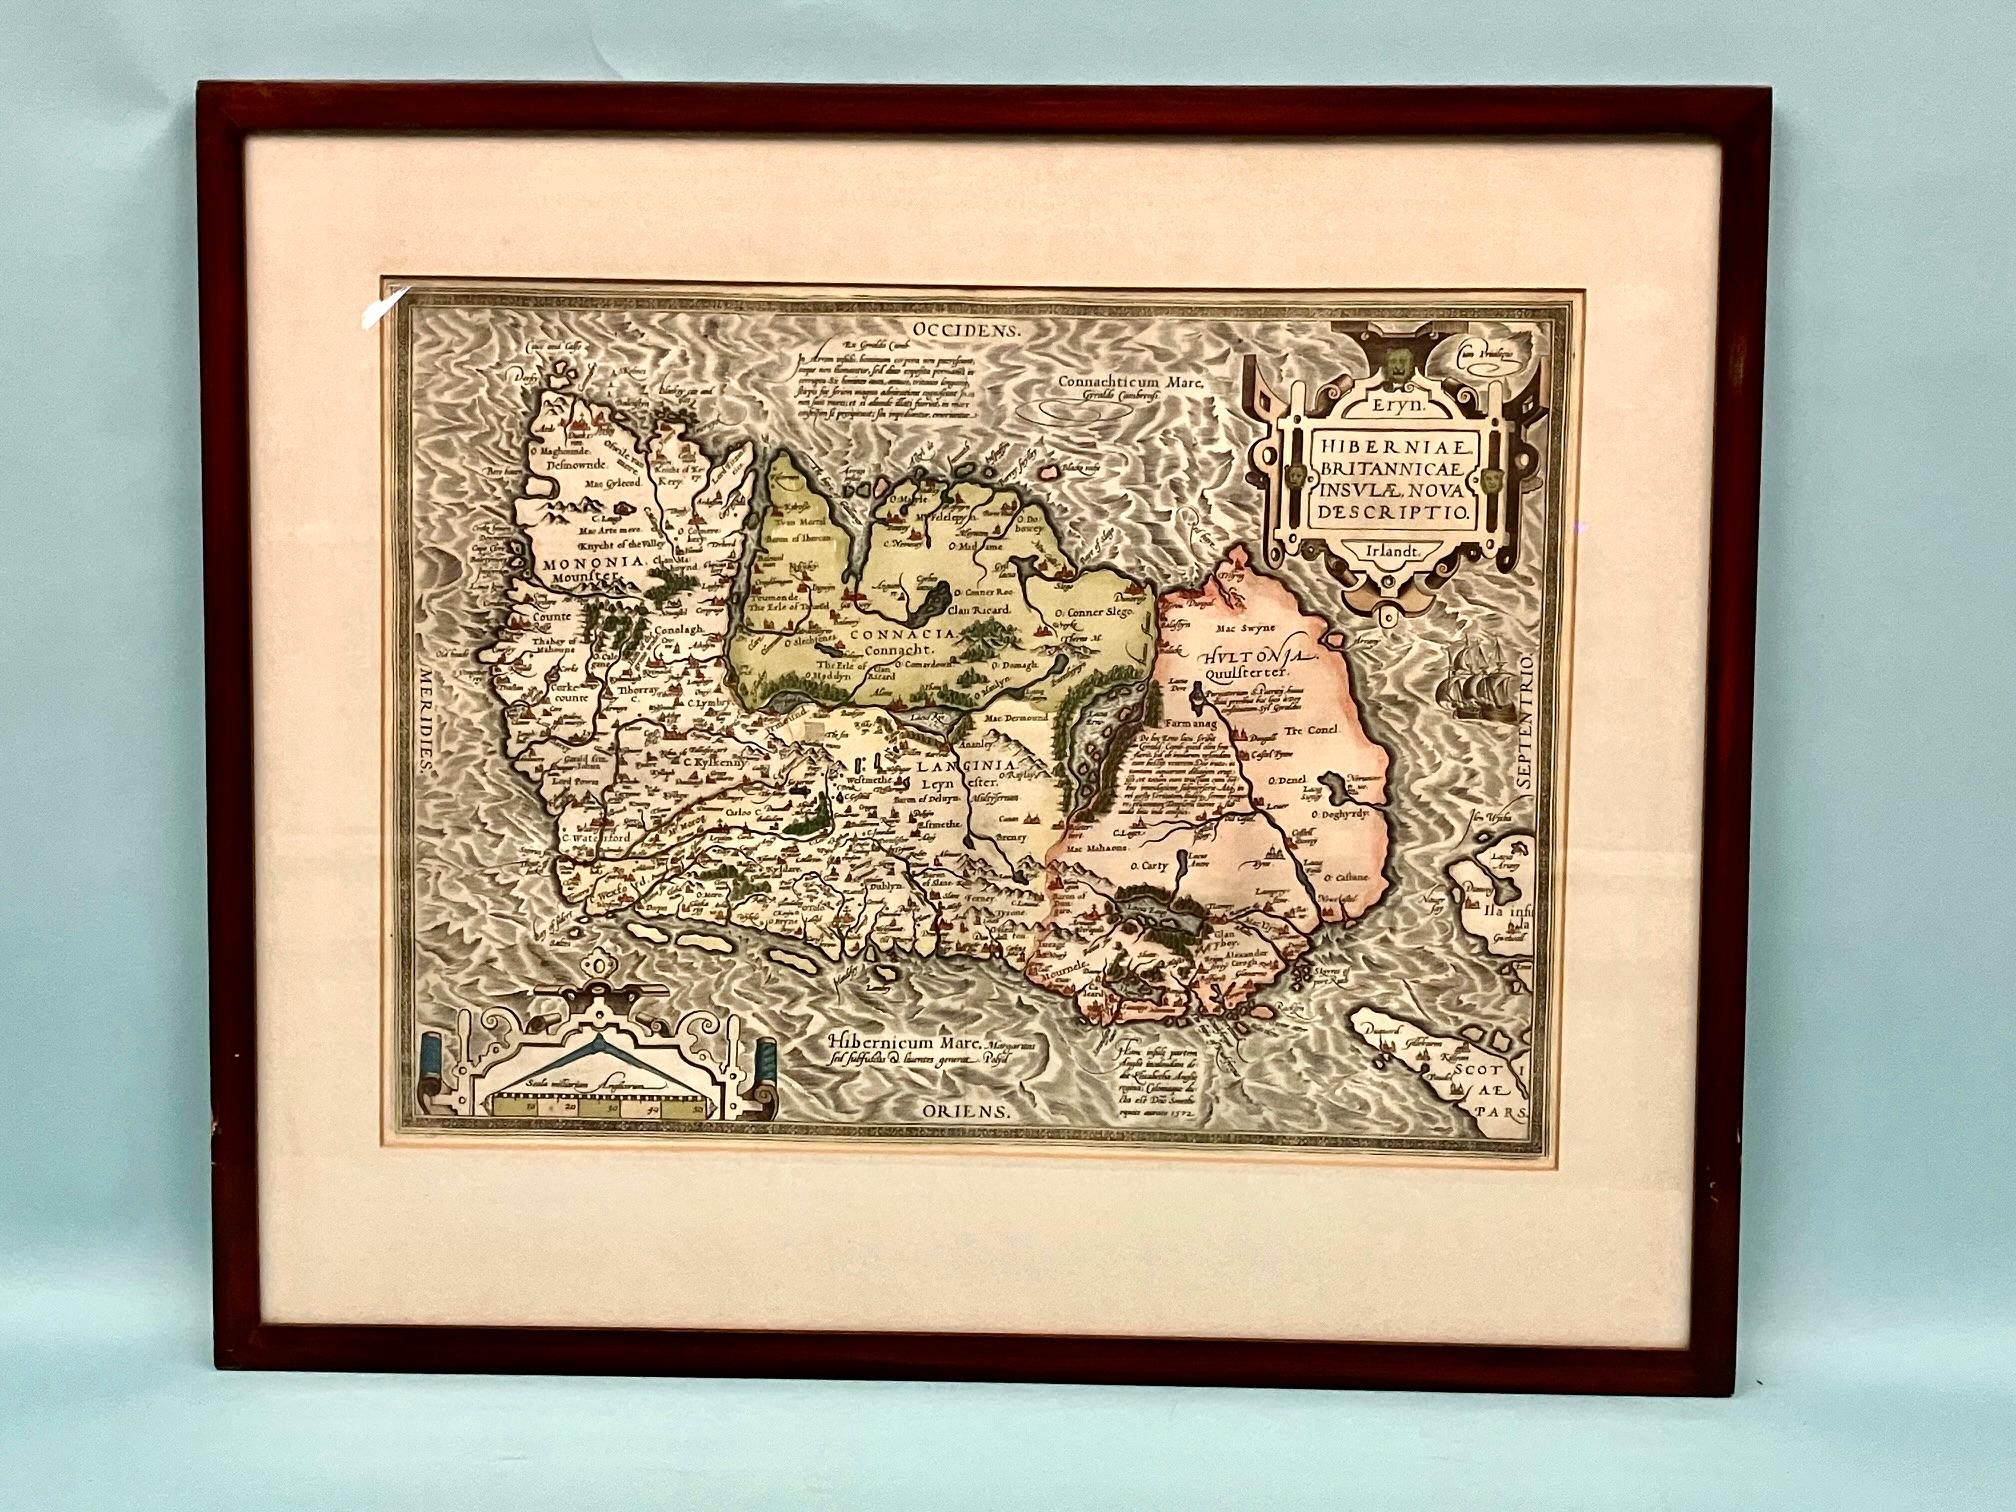 Abraham Ortelius (1527-1598) was a cartographer, geographer and maker from Antwerp in the Spanish Netherlands. He created the first modern atlas titled in Latin Theatrum Orbis Terrarum (Theatre of the World). The publication of the atlas, in 1570,